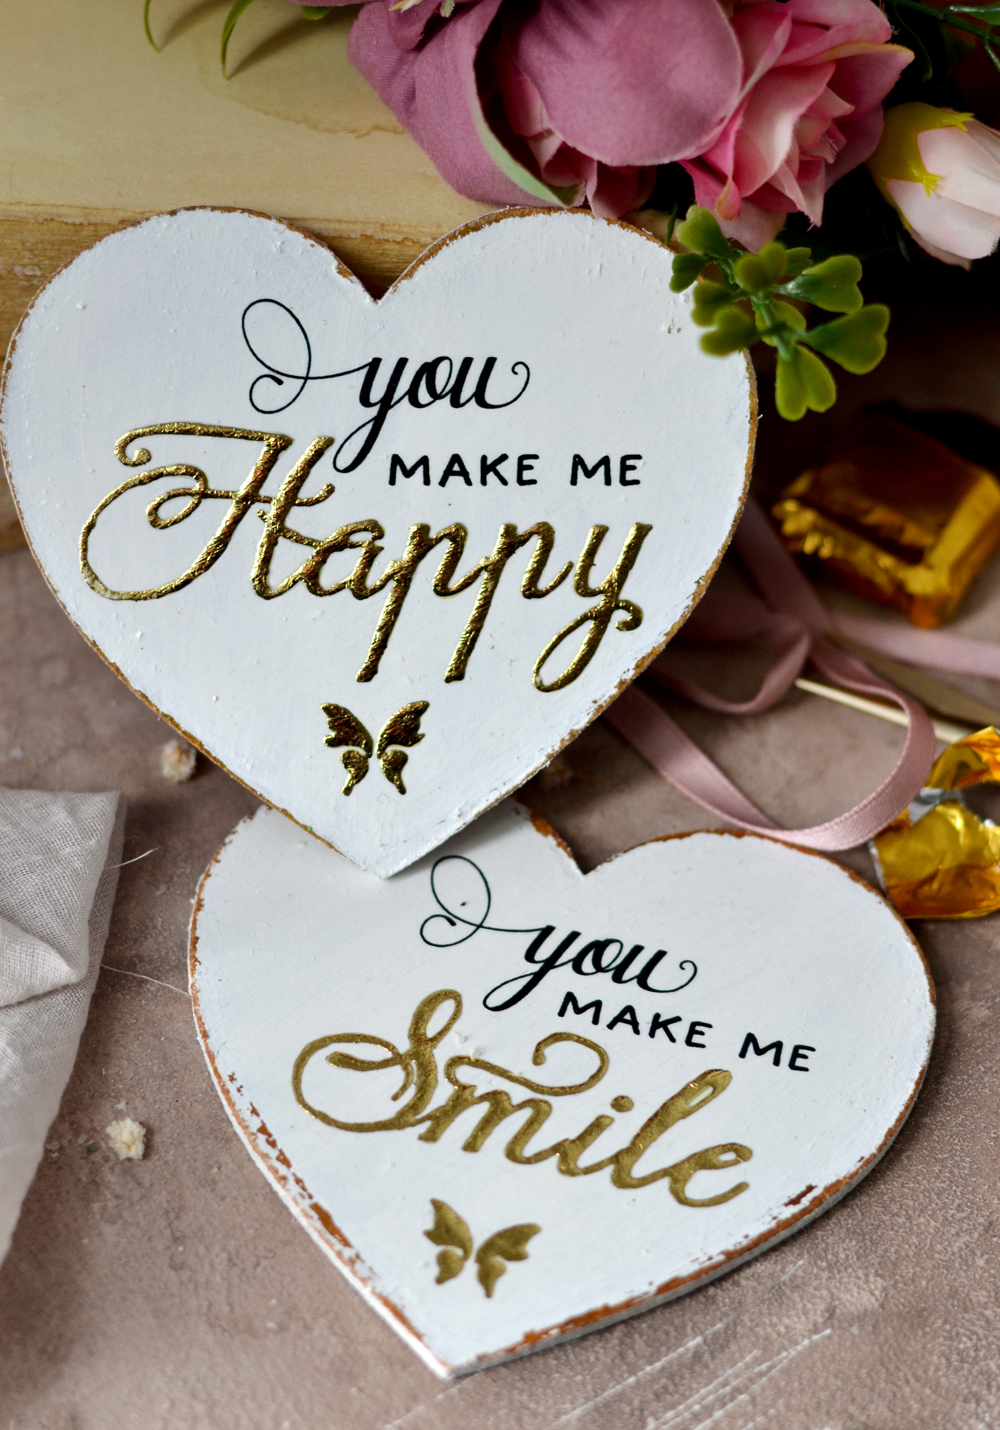 These gold hearts with love messages can be personalized with something meaningful to you and will make the perfect gifts for Valentine's day!